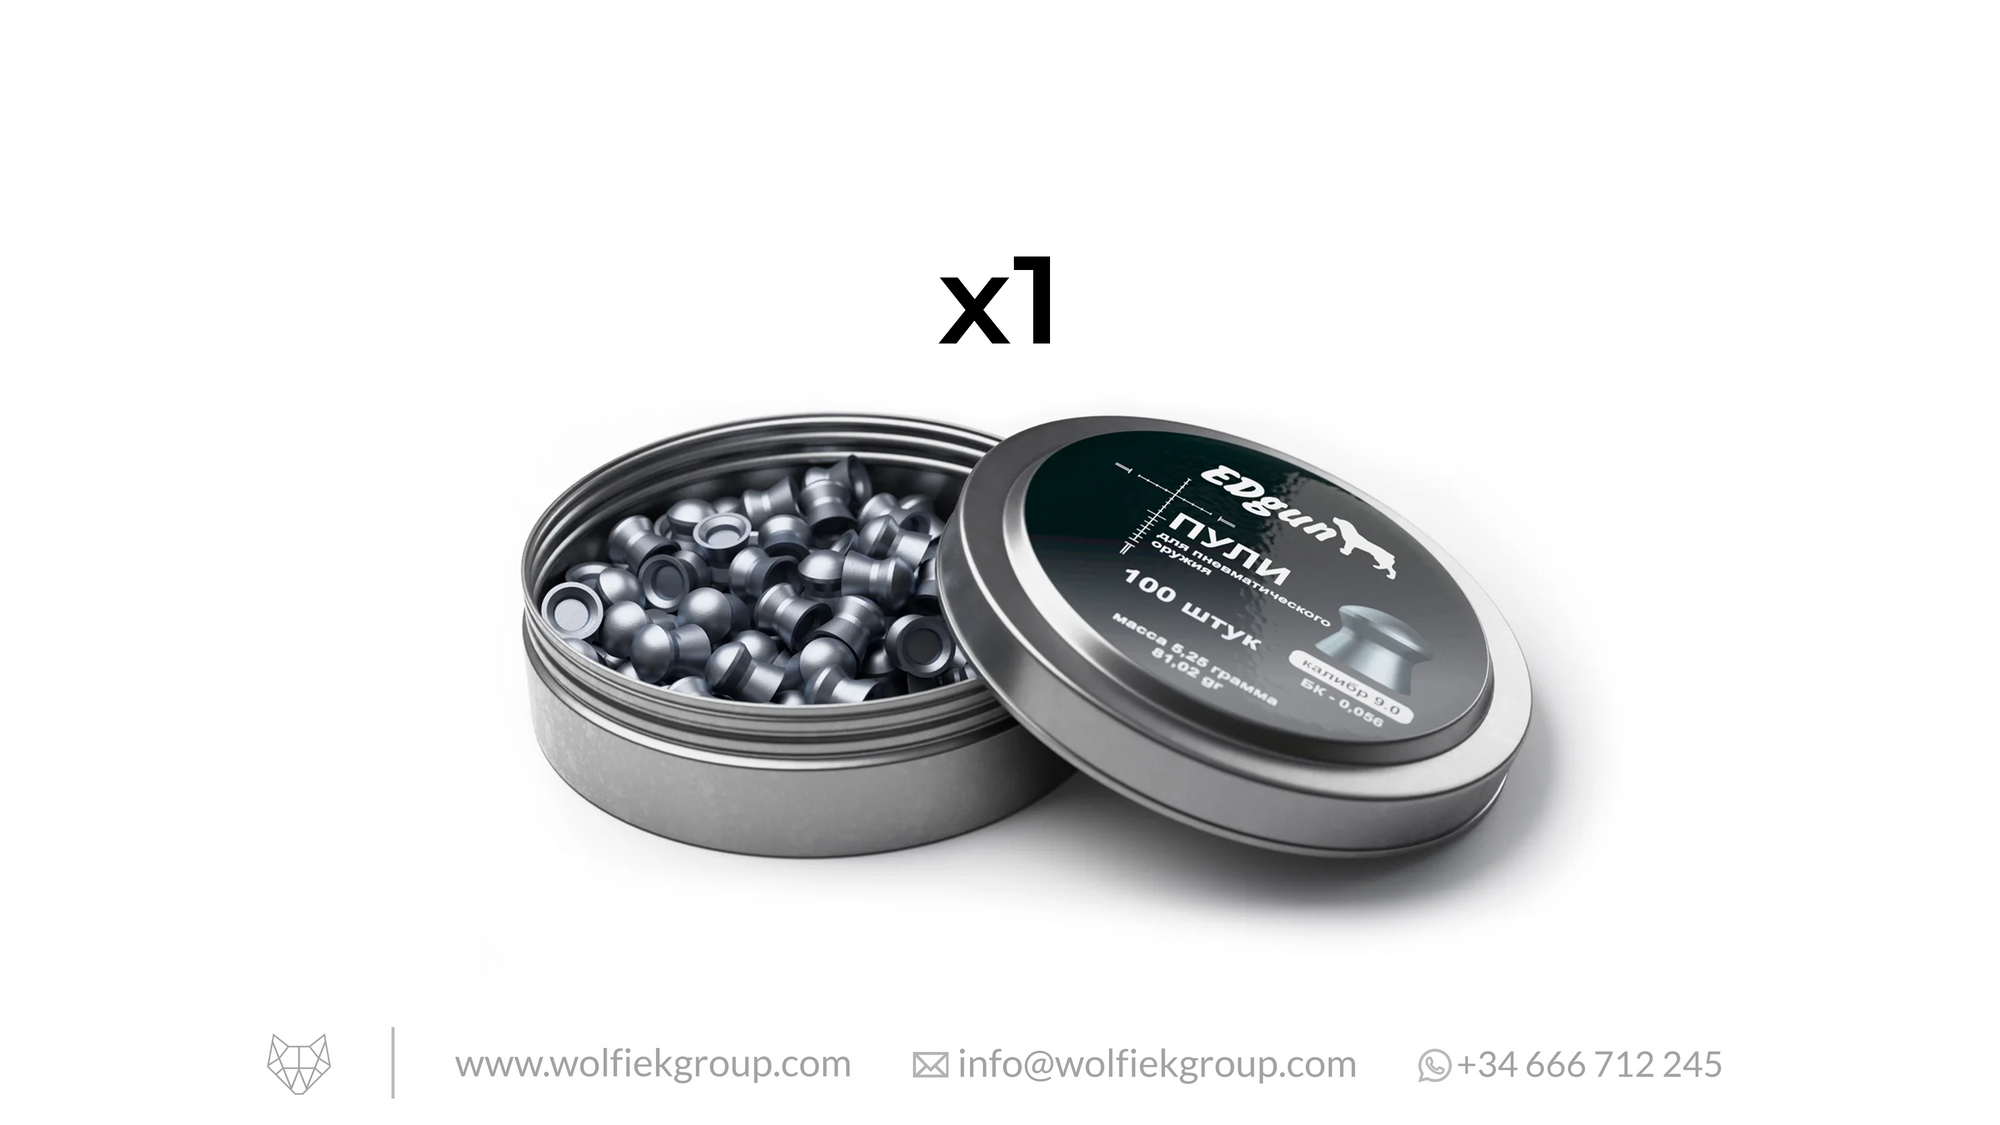 EDgun Premium Pellets Cal .35 (9mm) Weight 5.25g (81,01gr) with text buy 4 get 1 for free